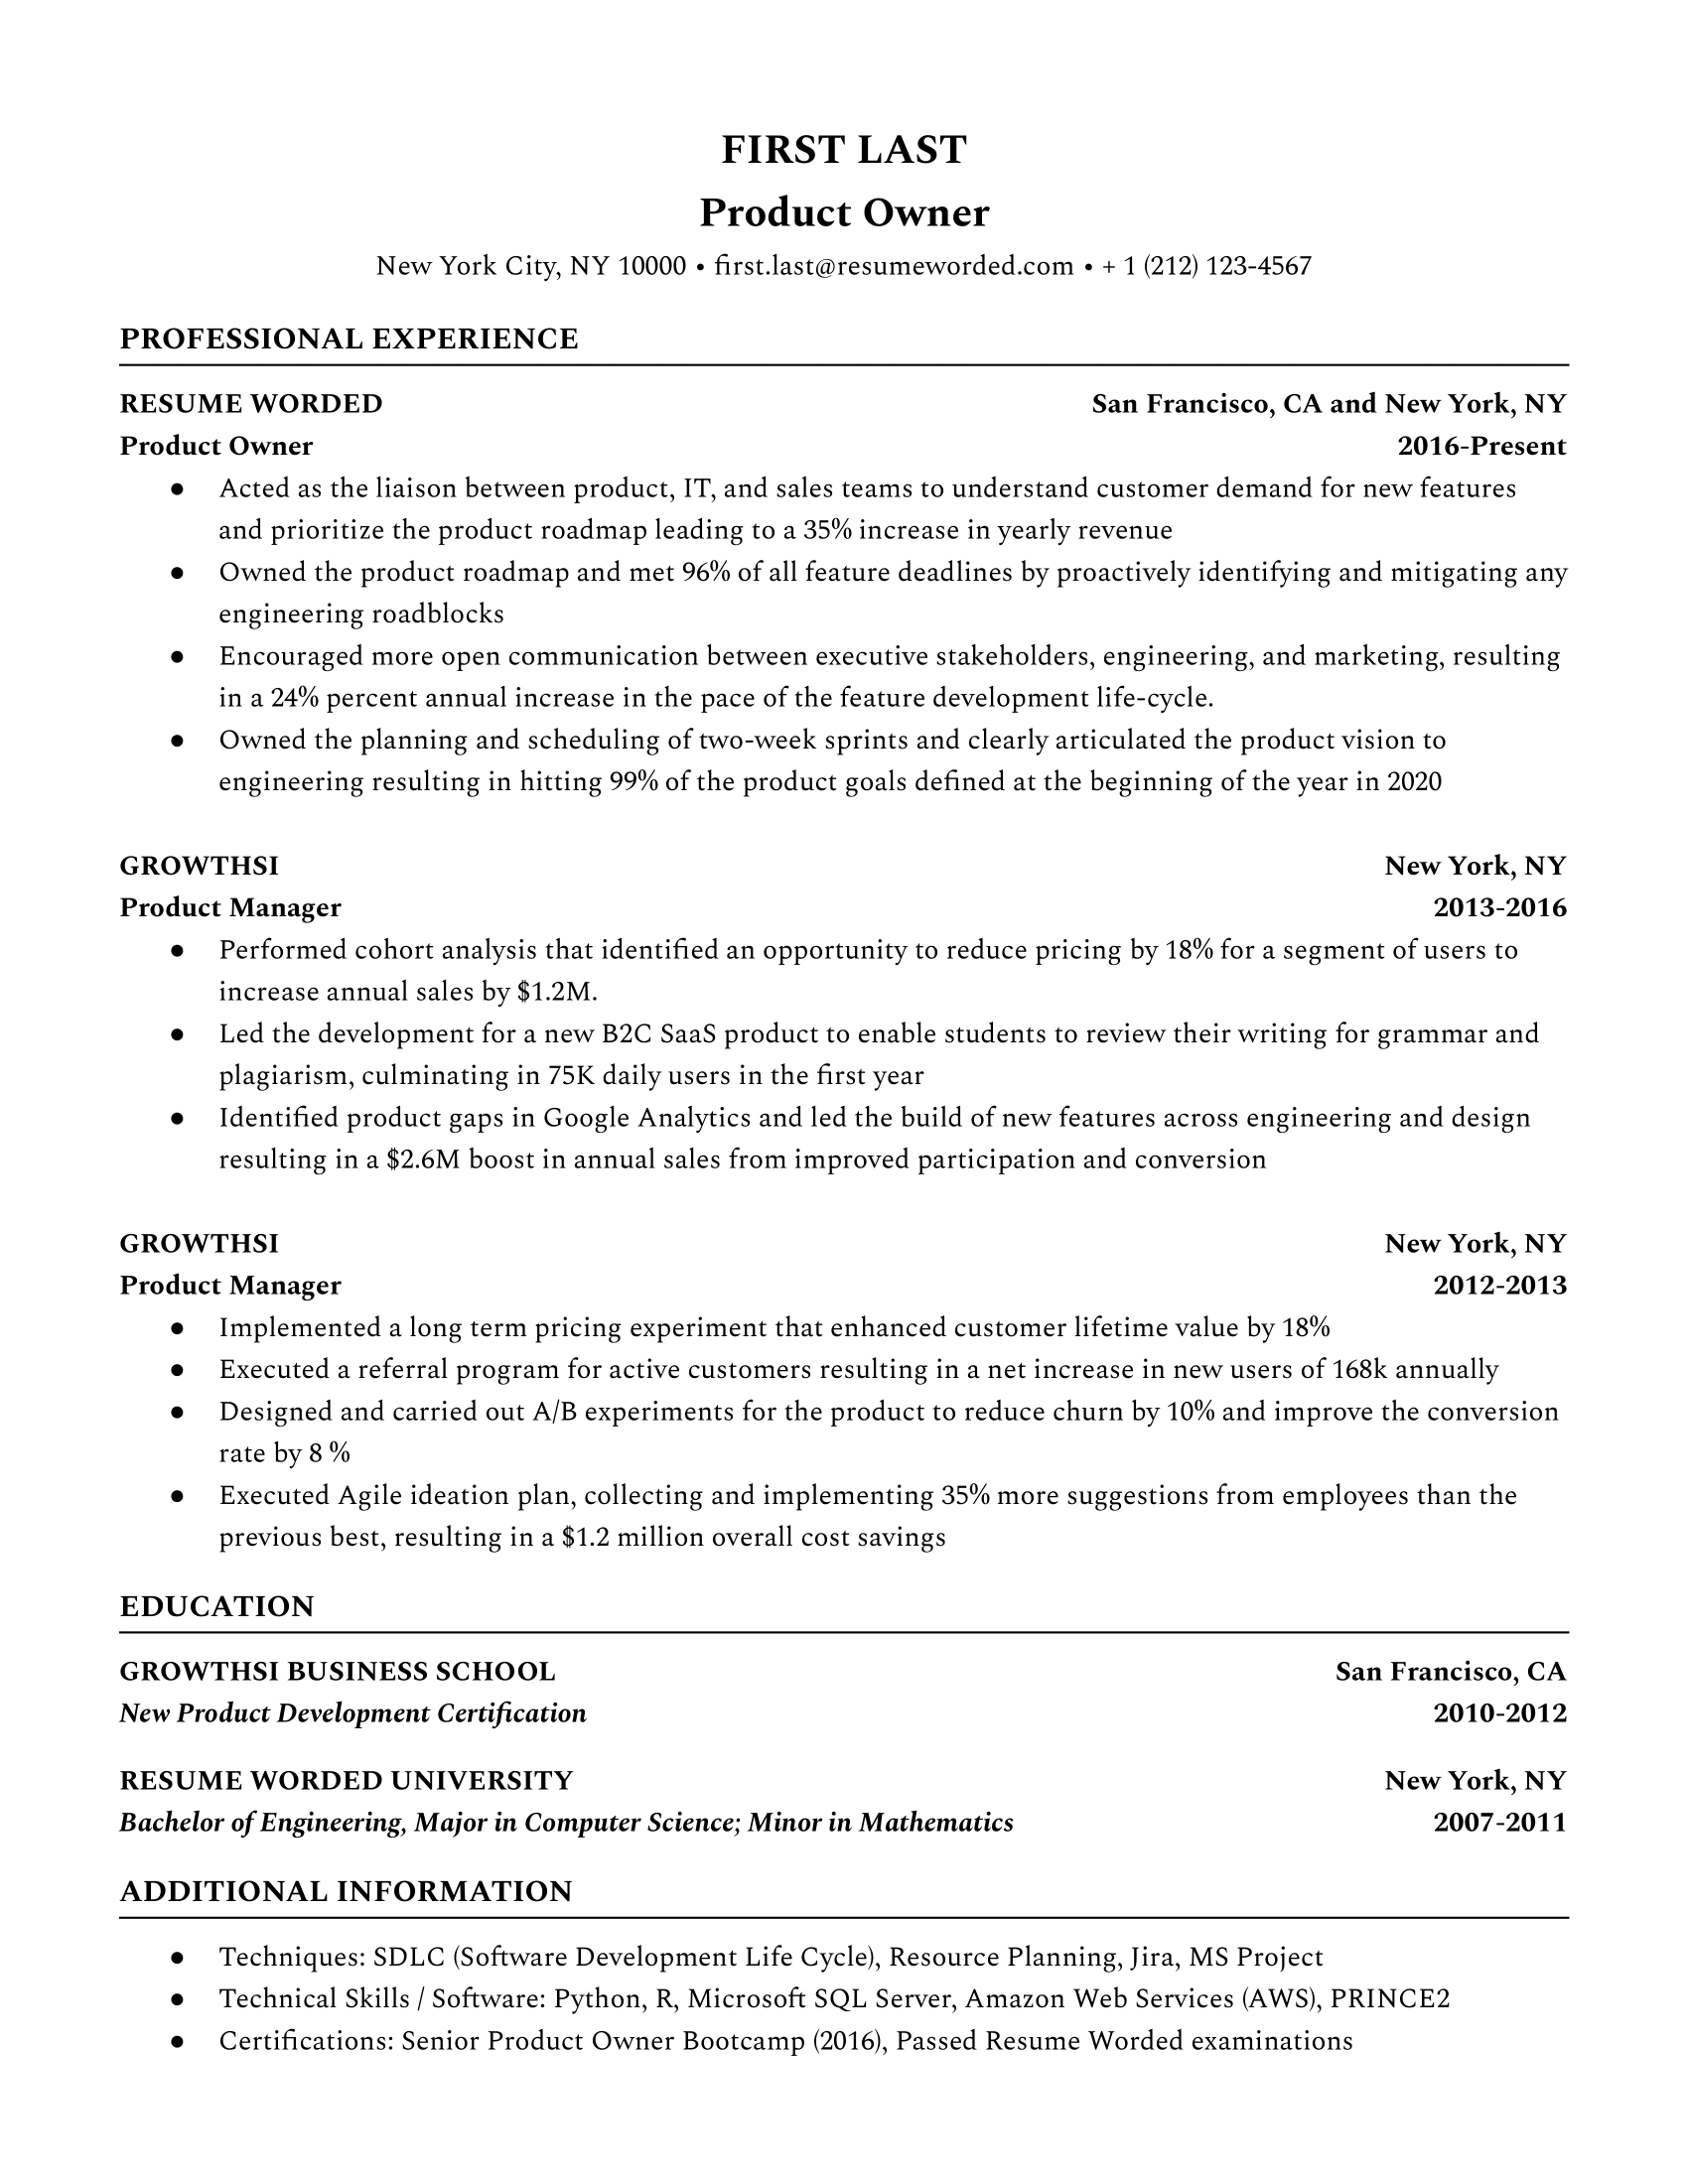 Highlight relevant experience - Clinical Research Assistant Resume